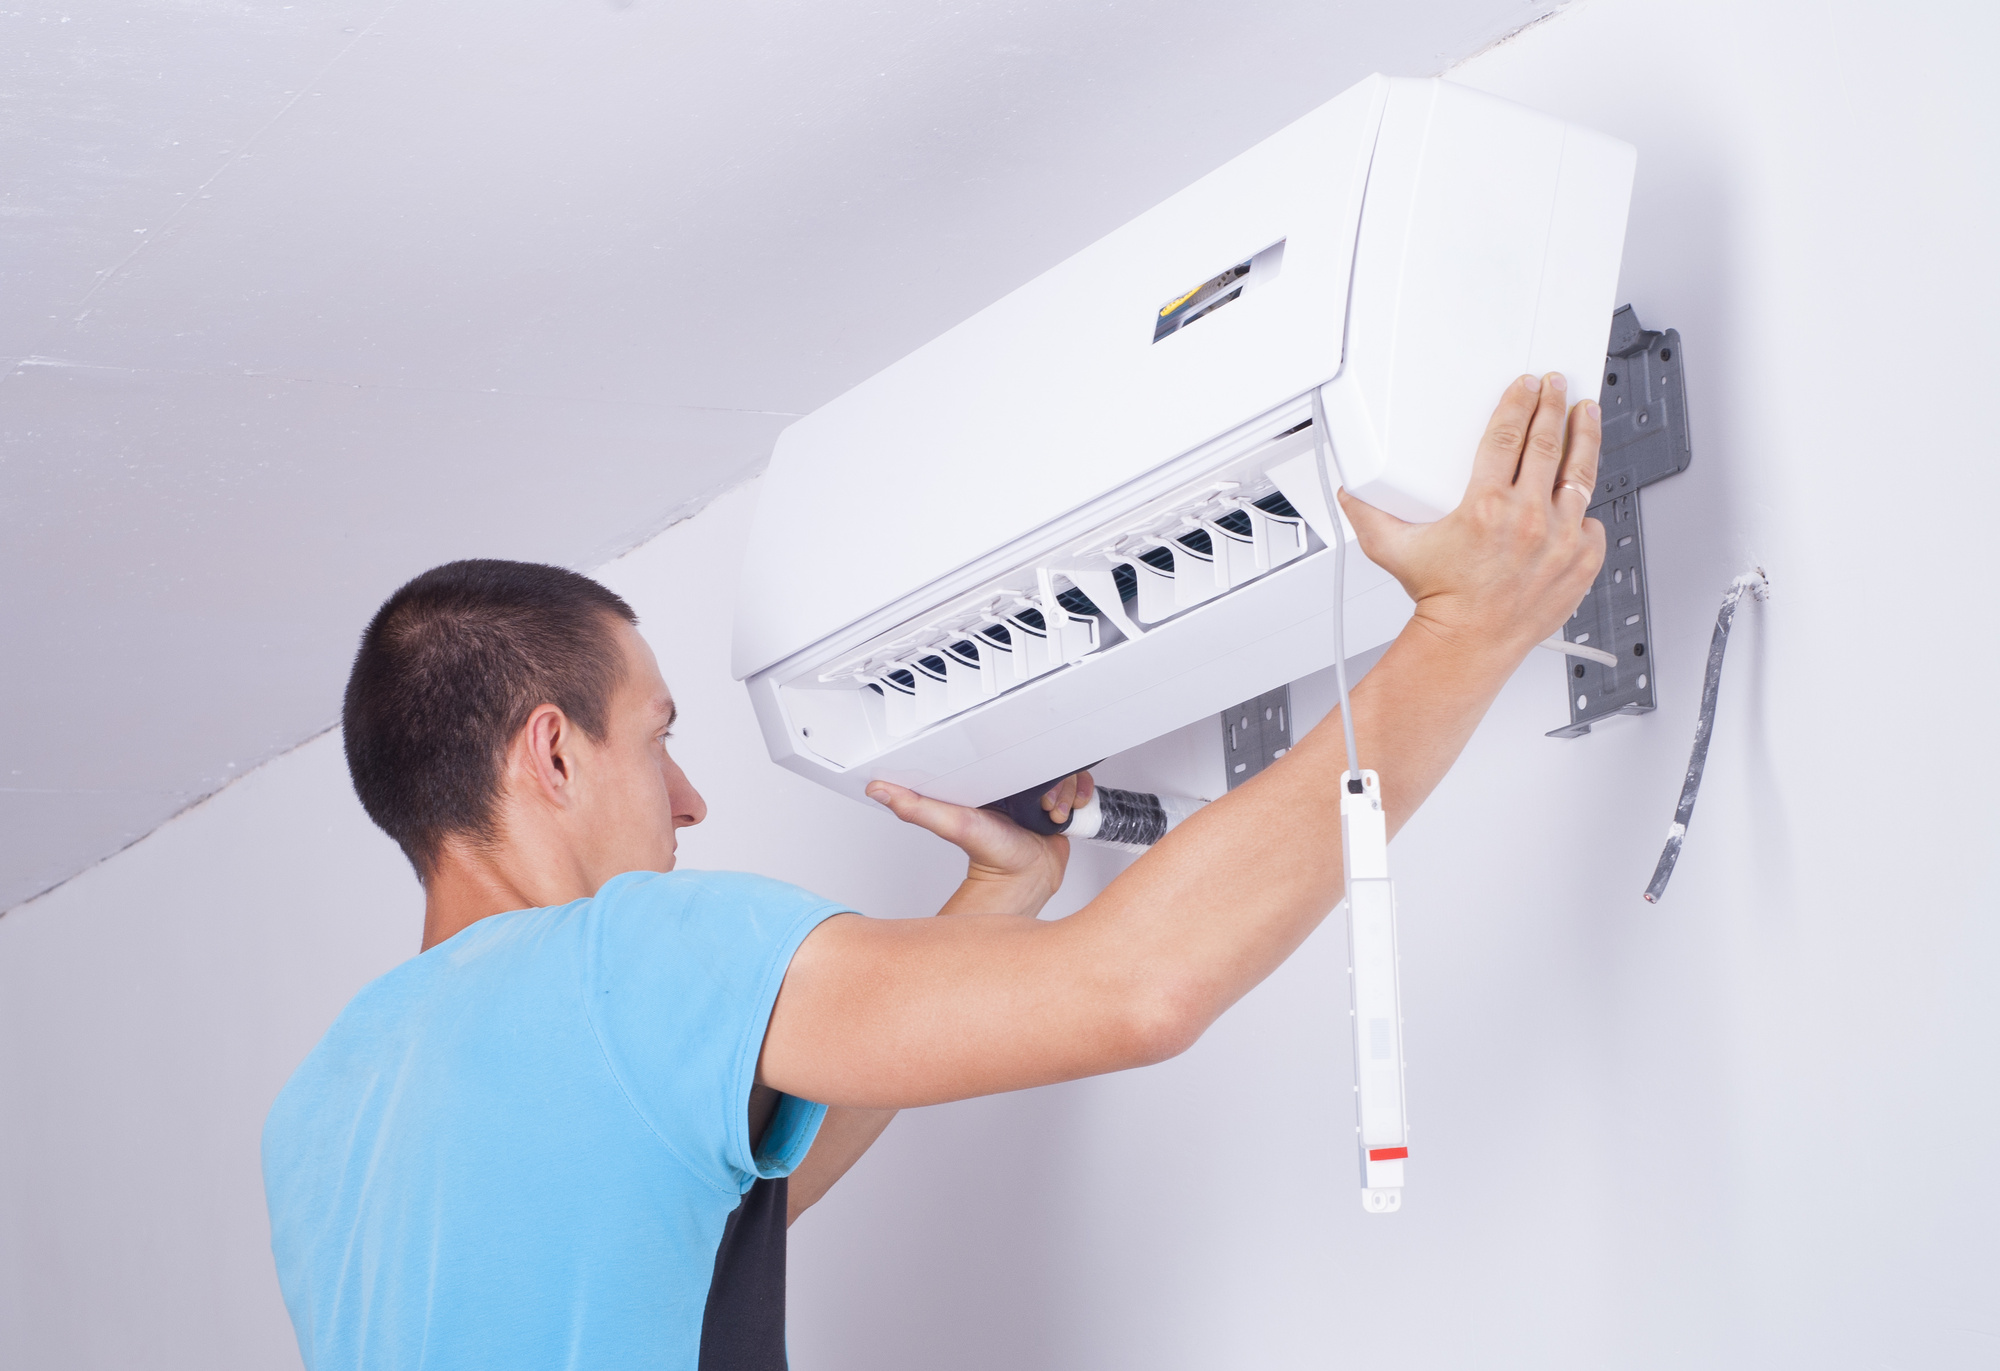 How to install an air conditioner?